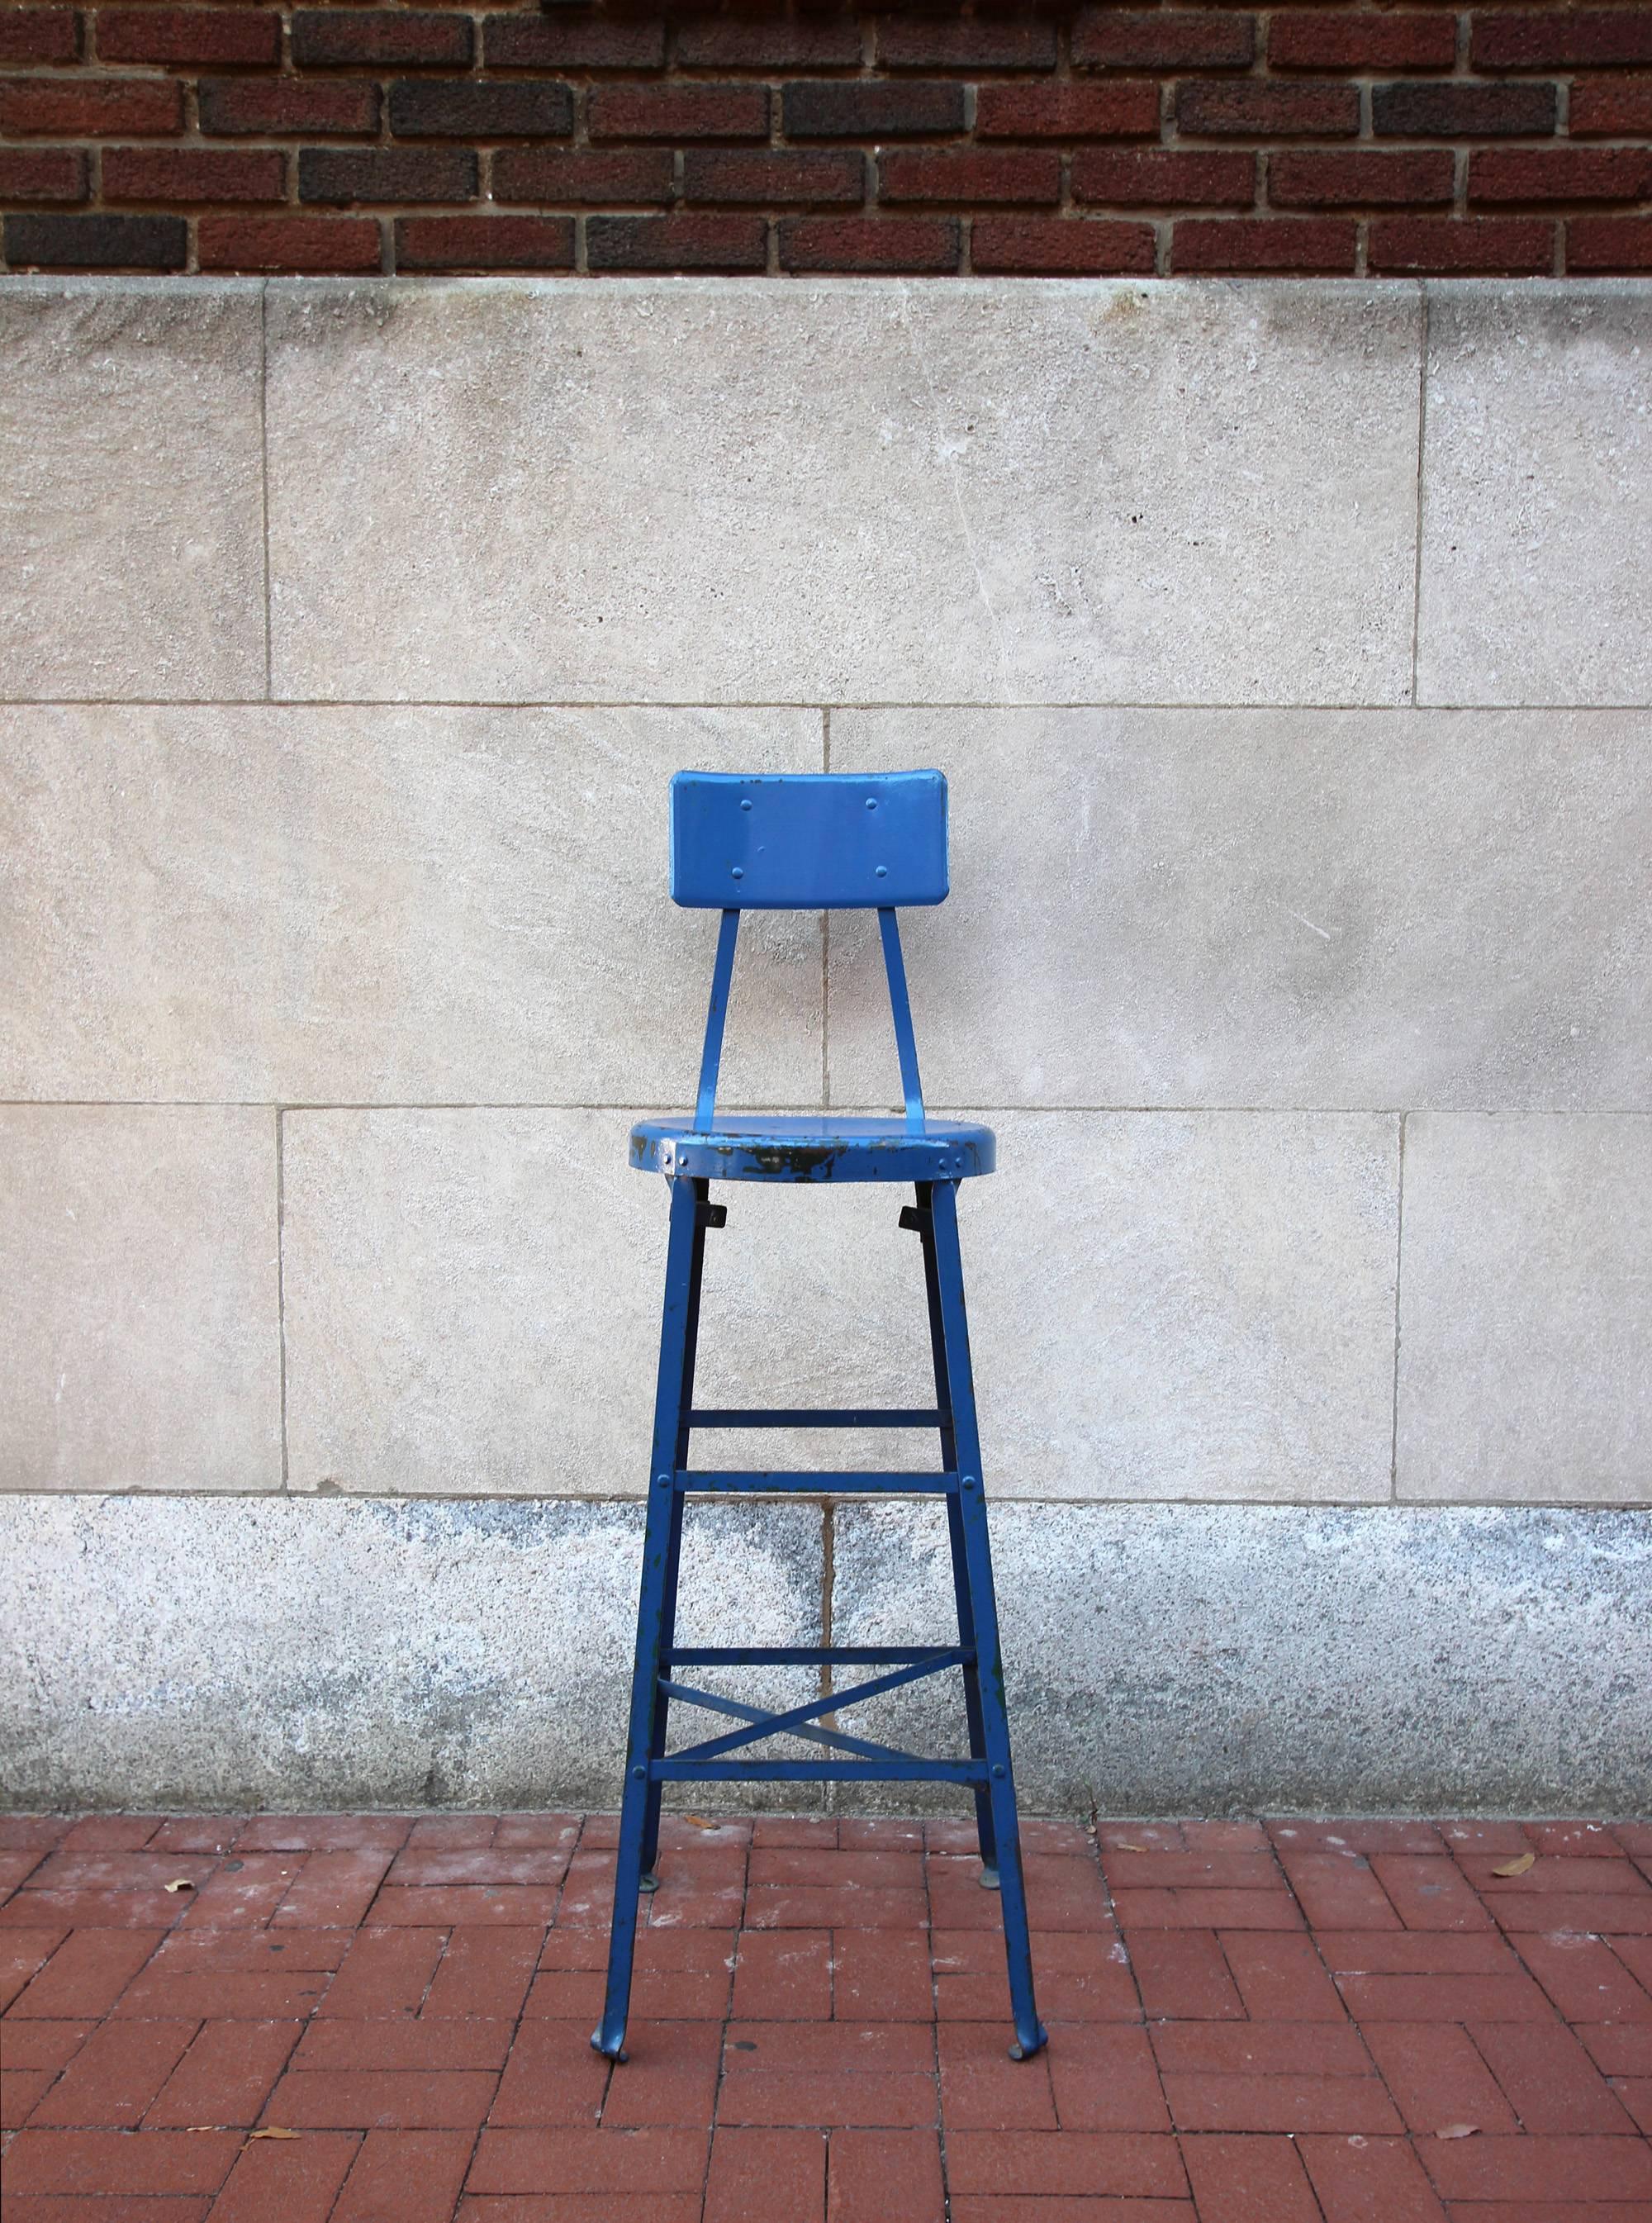 Handsome and unusually tall metal Industrial work stool in vivid blue paint, American, mid-20th century. Very sturdy.